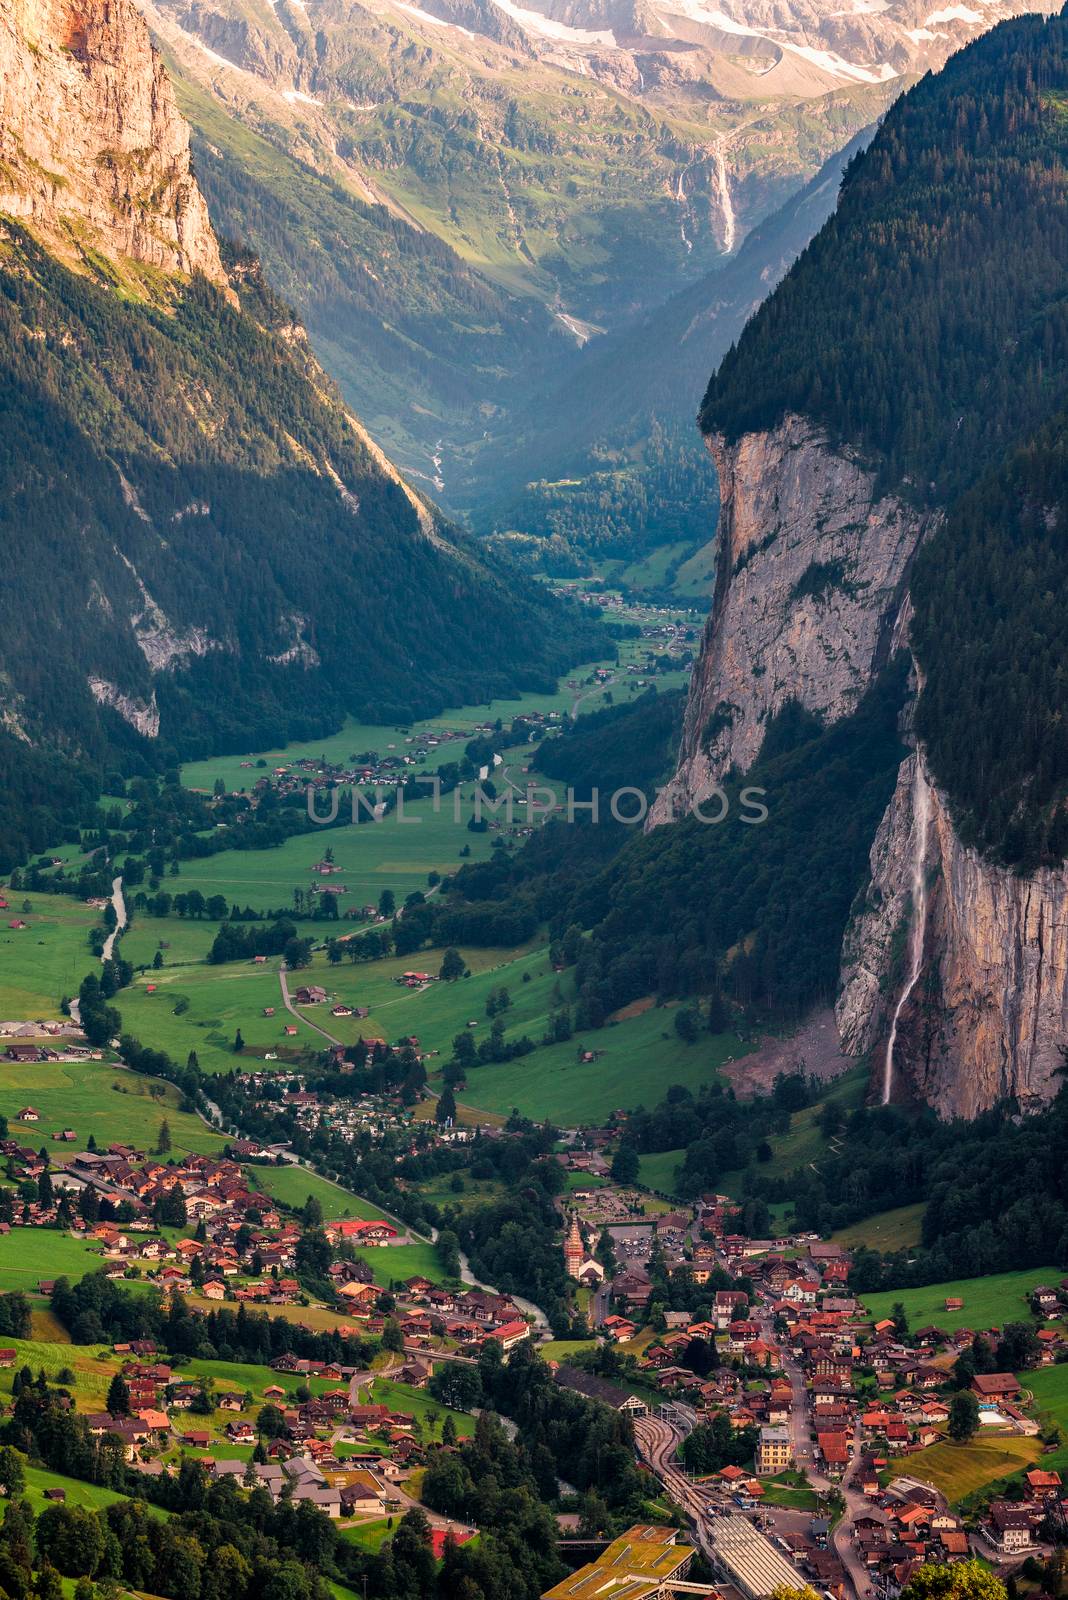 Lauterbrunnen valley in the Swiss Alps with an iconic waterfall by nickfox